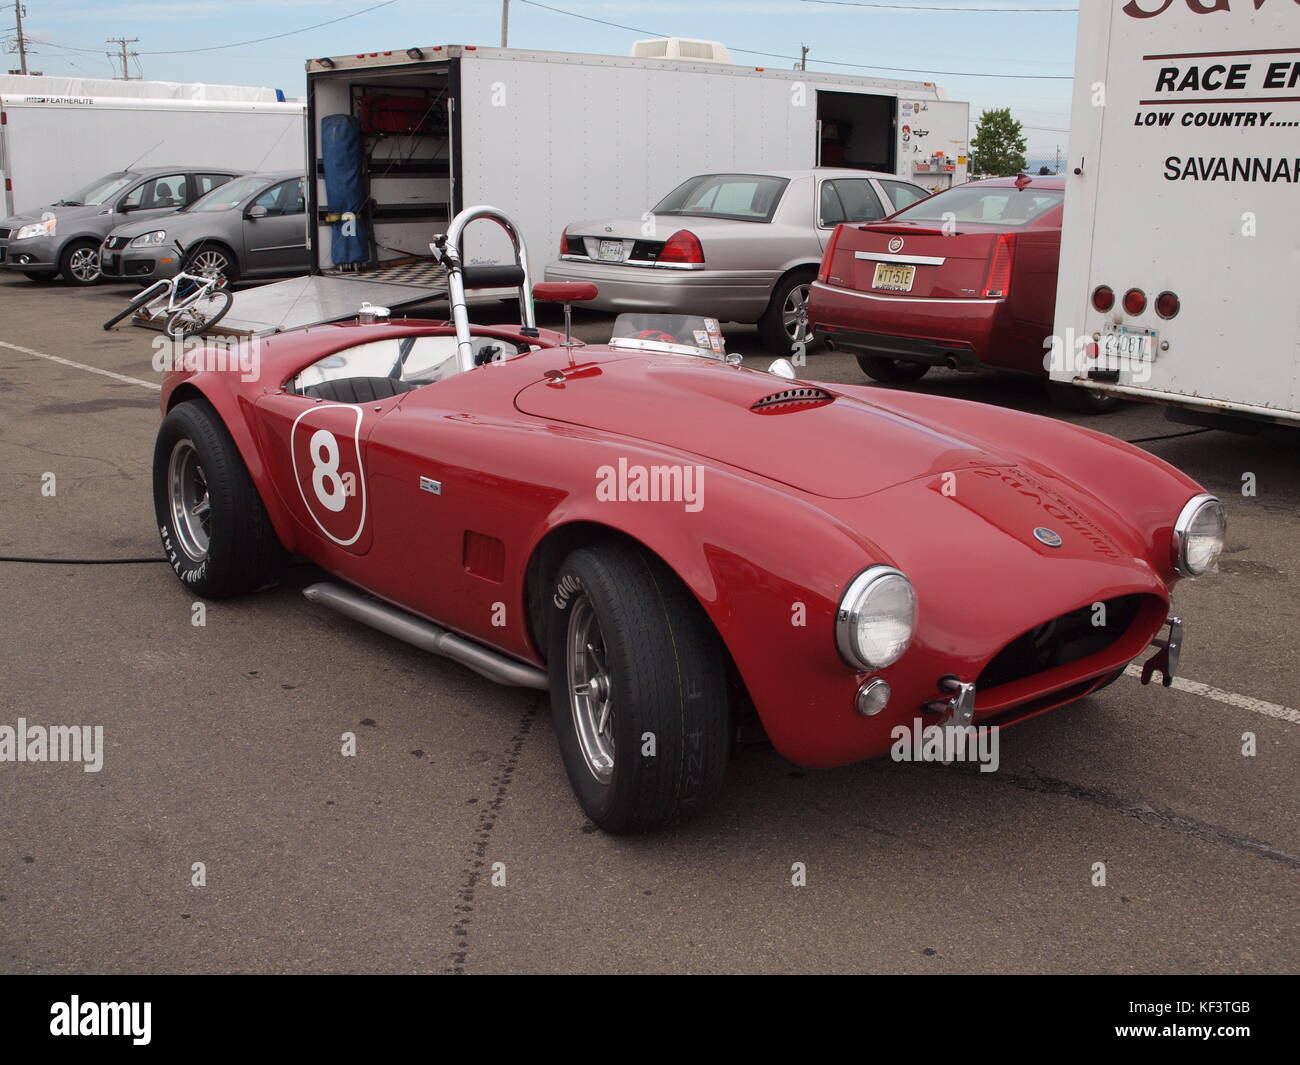 Original 1963 Shelby Cobra competition car as raced by the late Mike Stott of Ho-Ho-Kus, New Jersey. The car, auctioned recently for over $1million. Stock Photo